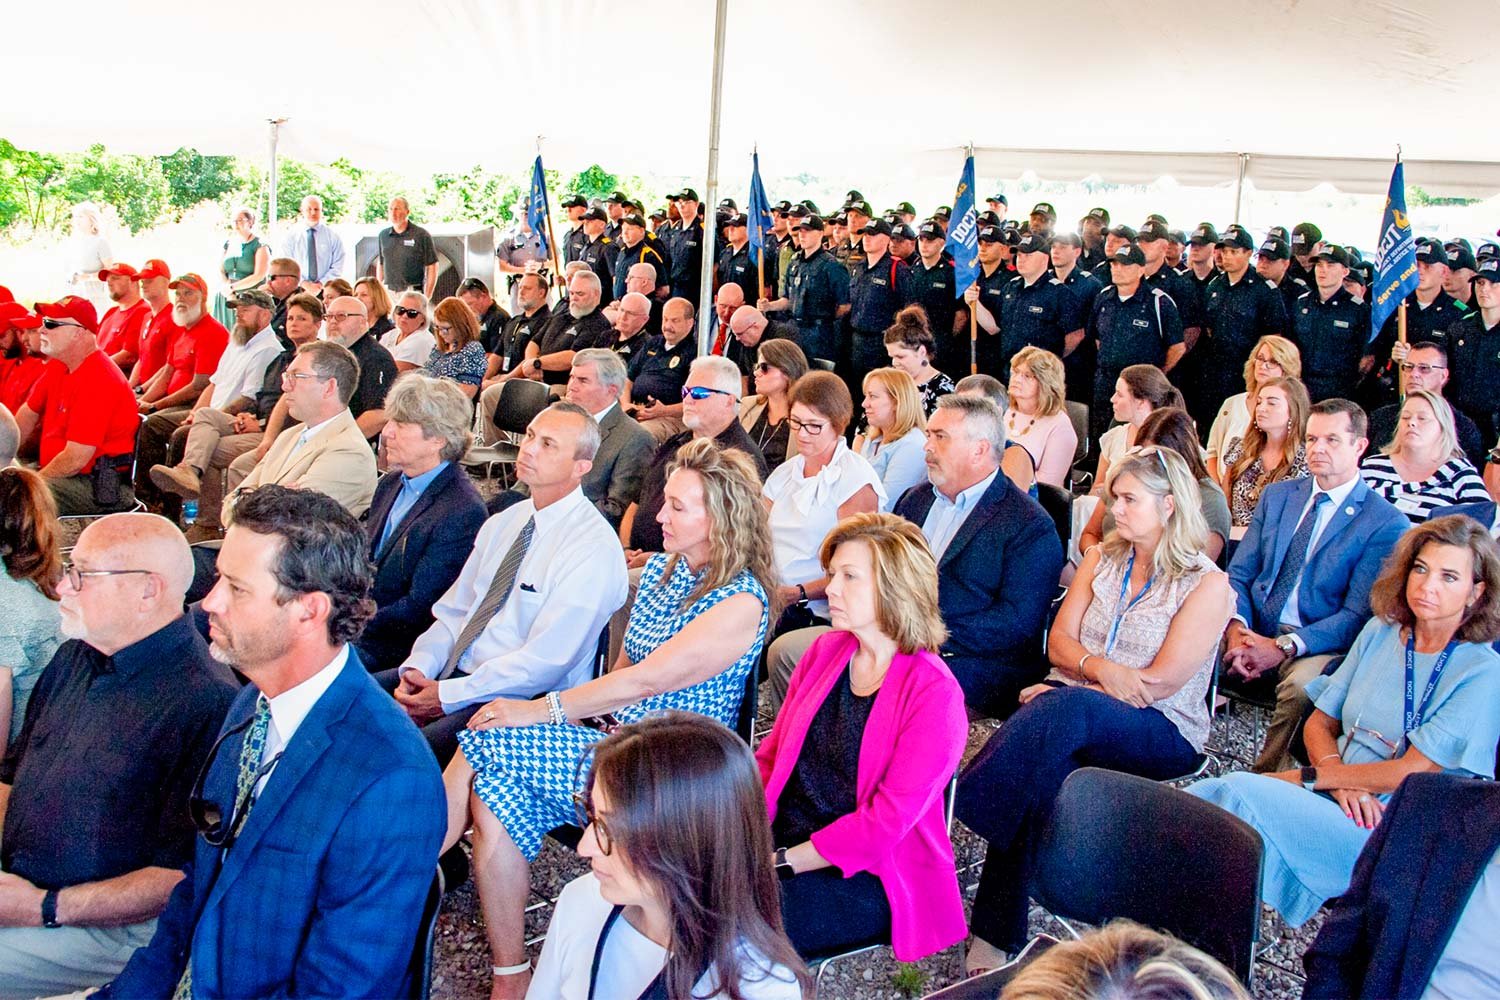  More than 300 people turned out Monday for the Jody Cash Multipurpose Training Center groundbreaking ceremony. The facility is expected to be completed in 2025. (Photo by Michael Moore) 